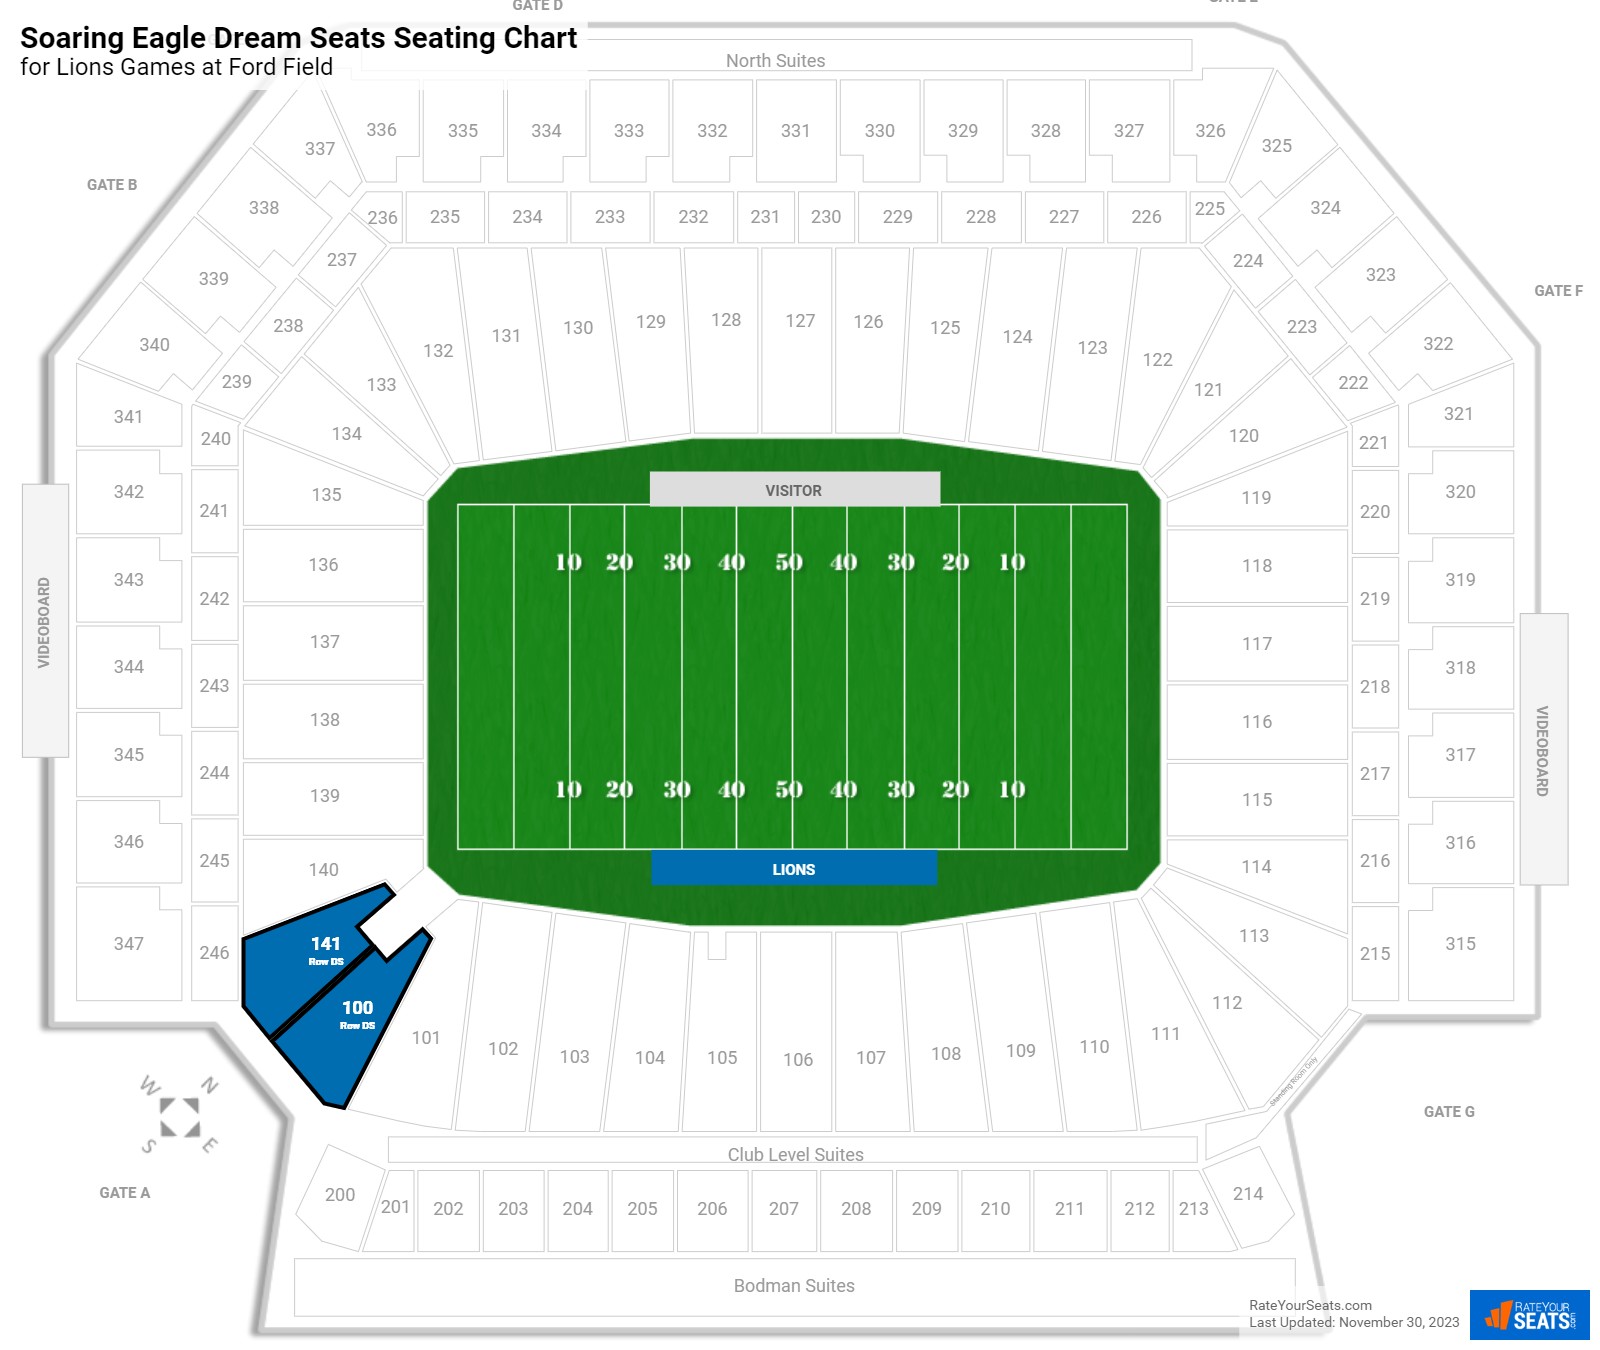 Lions Soaring Eagle Dream Seats Seating Chart at Ford Field